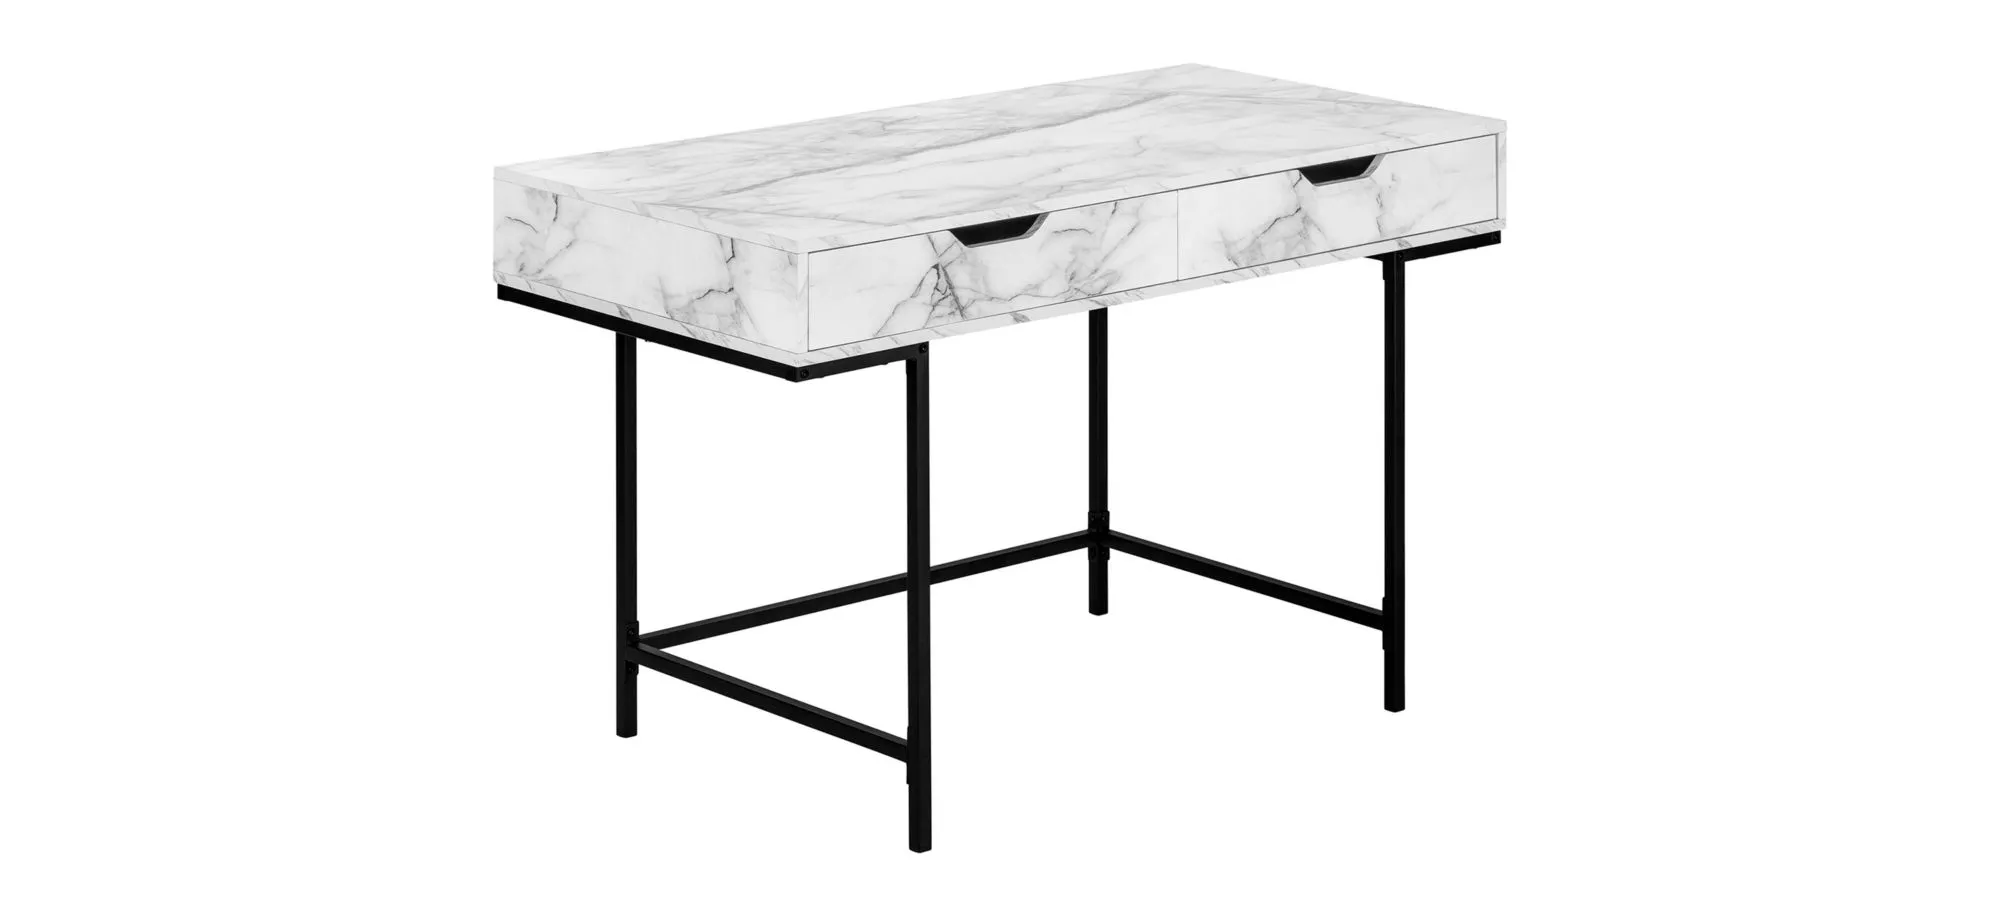 Forrest Computer Desk in White by Monarch Specialties